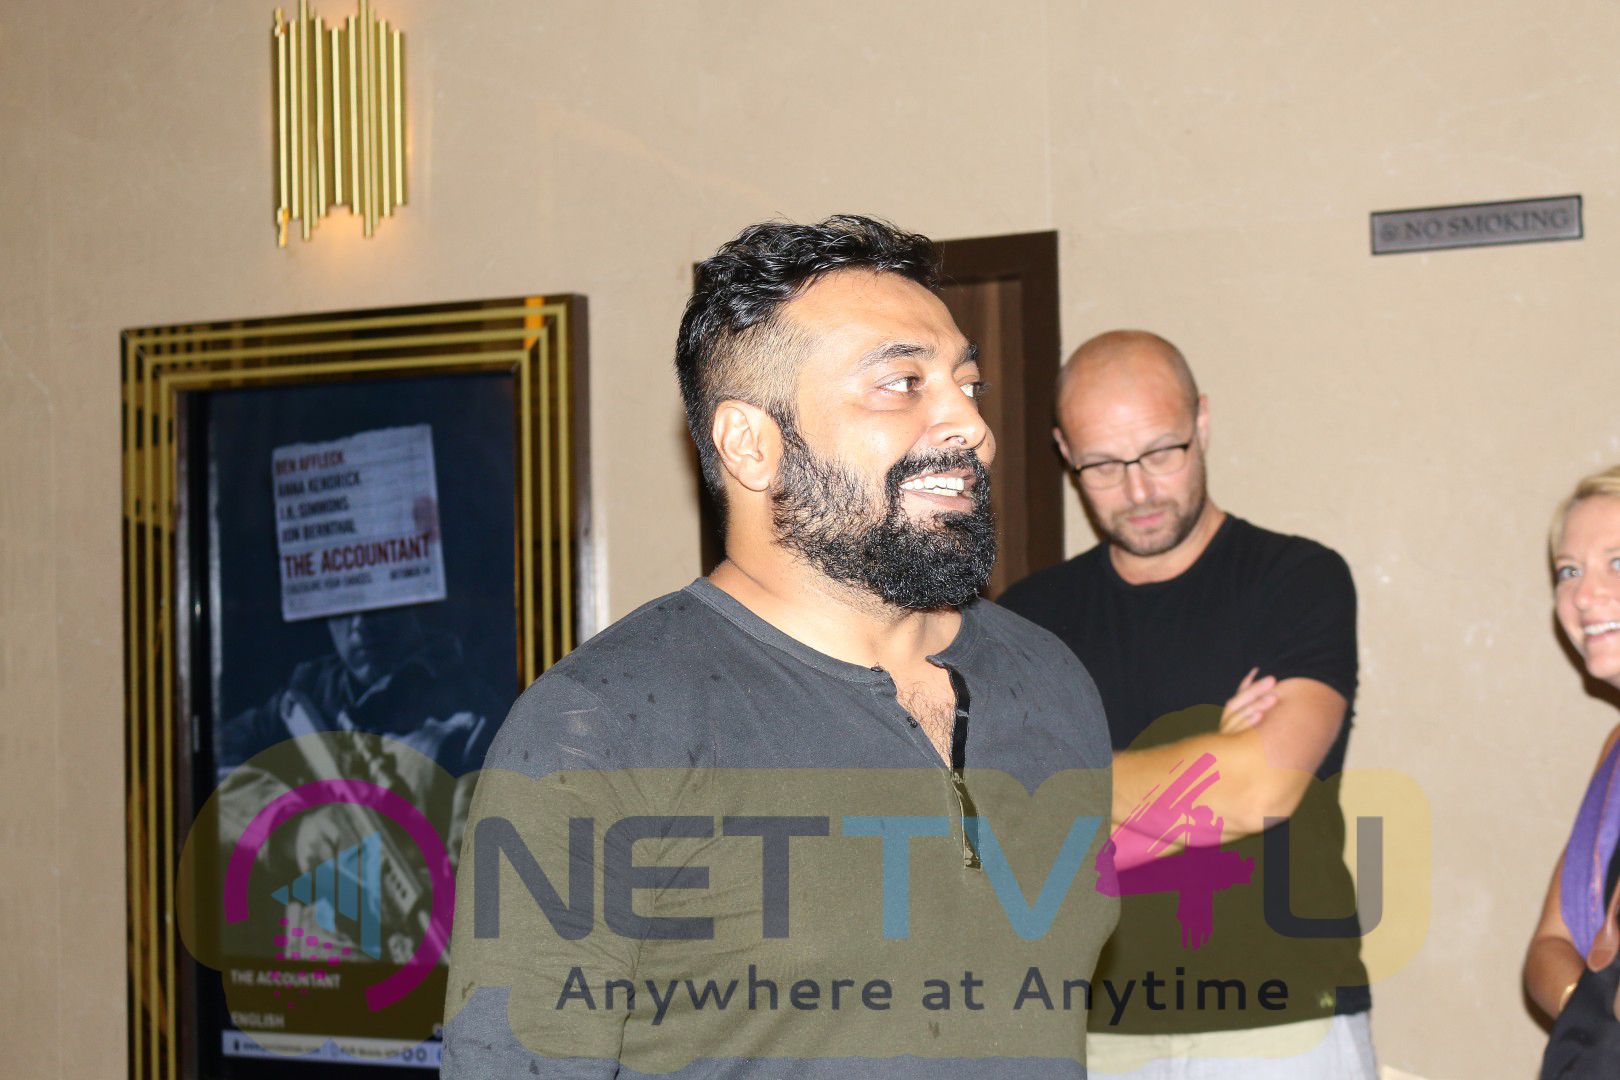 Photos Of India Premiere Of Google 1st Crowdsourced Footage Film With Anurag Kashyap Hindi Gallery